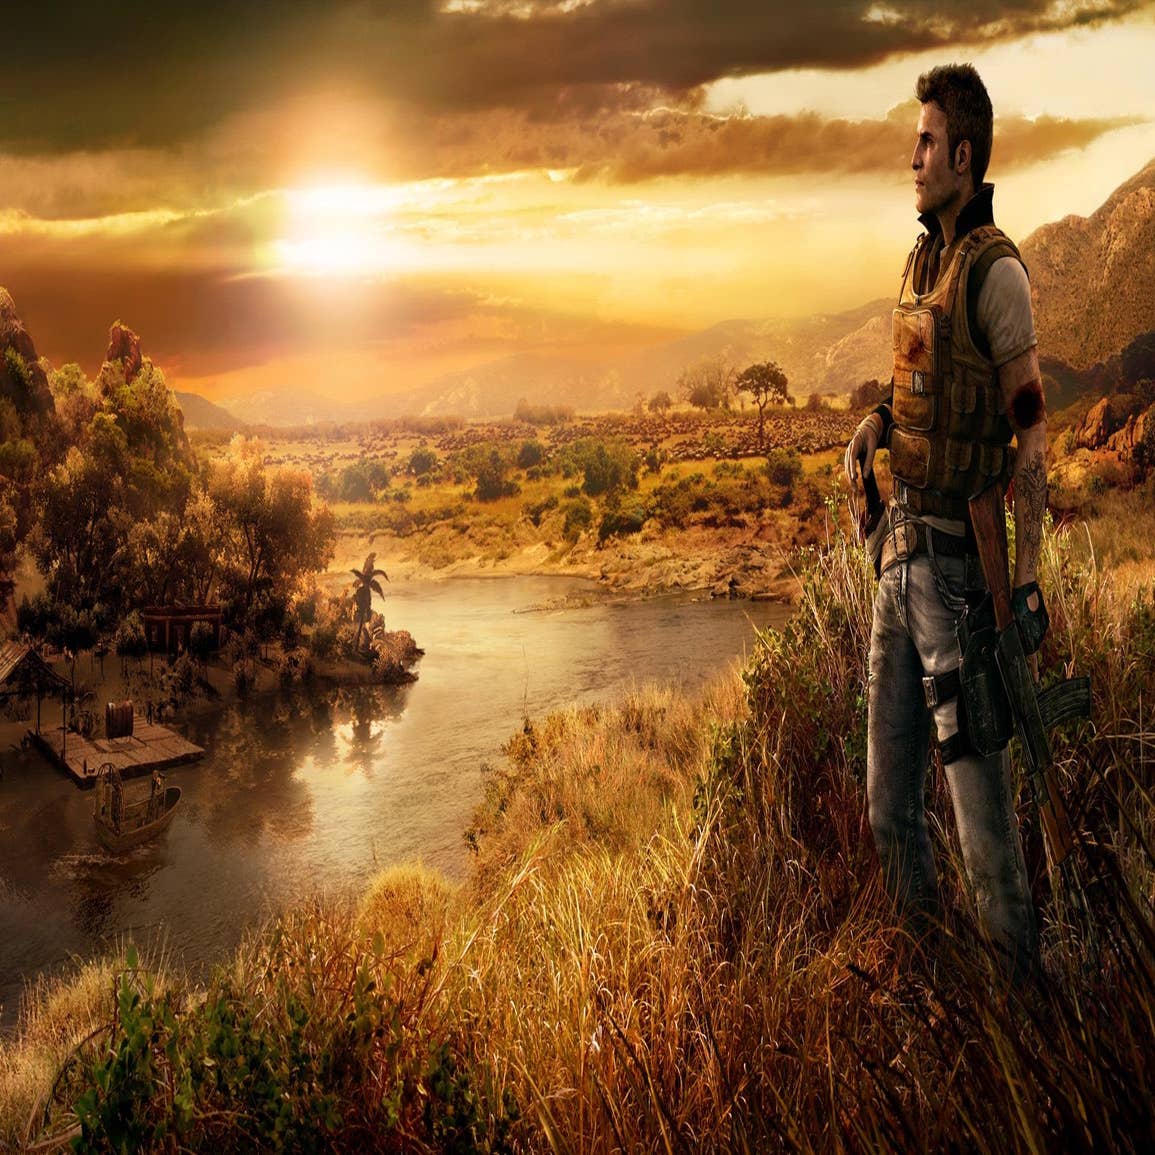 Far Cry 2 still looks stunning almost 10 years after launch : r/farcry